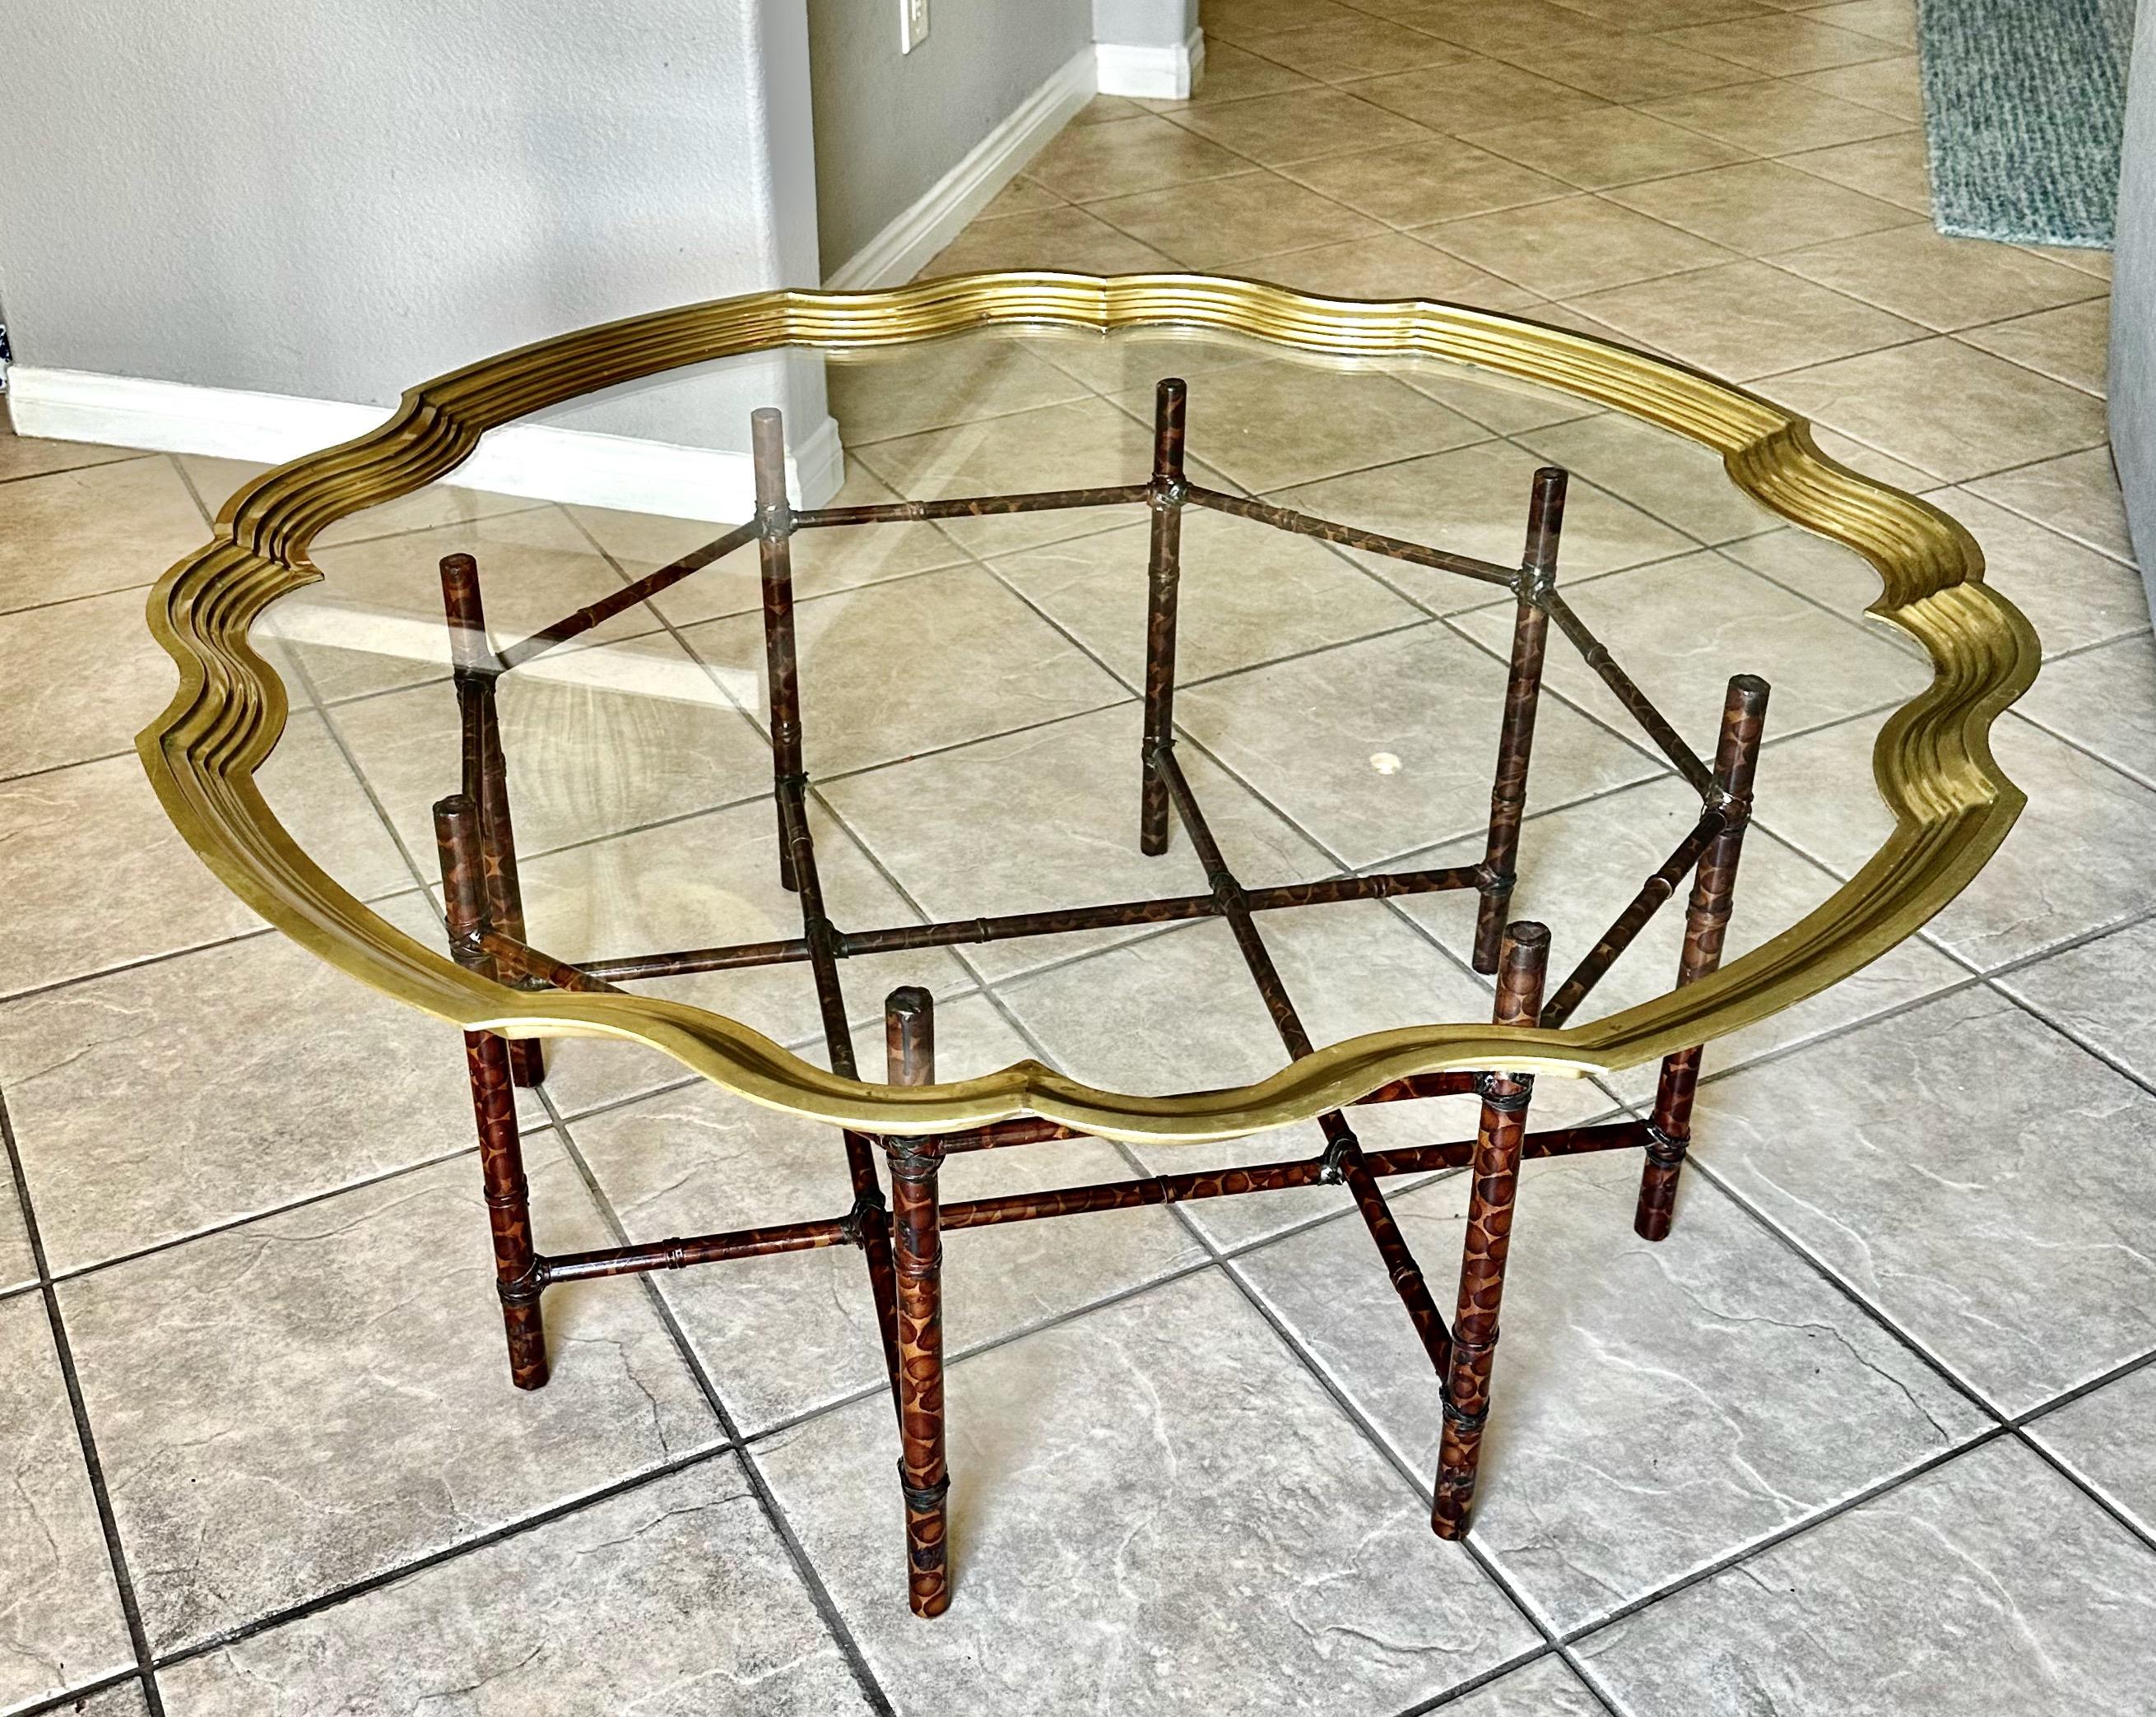 Mid-20th Century Faux Bamboo Tortoise Shell Round Glass Cocktail Coffee Table For Sale